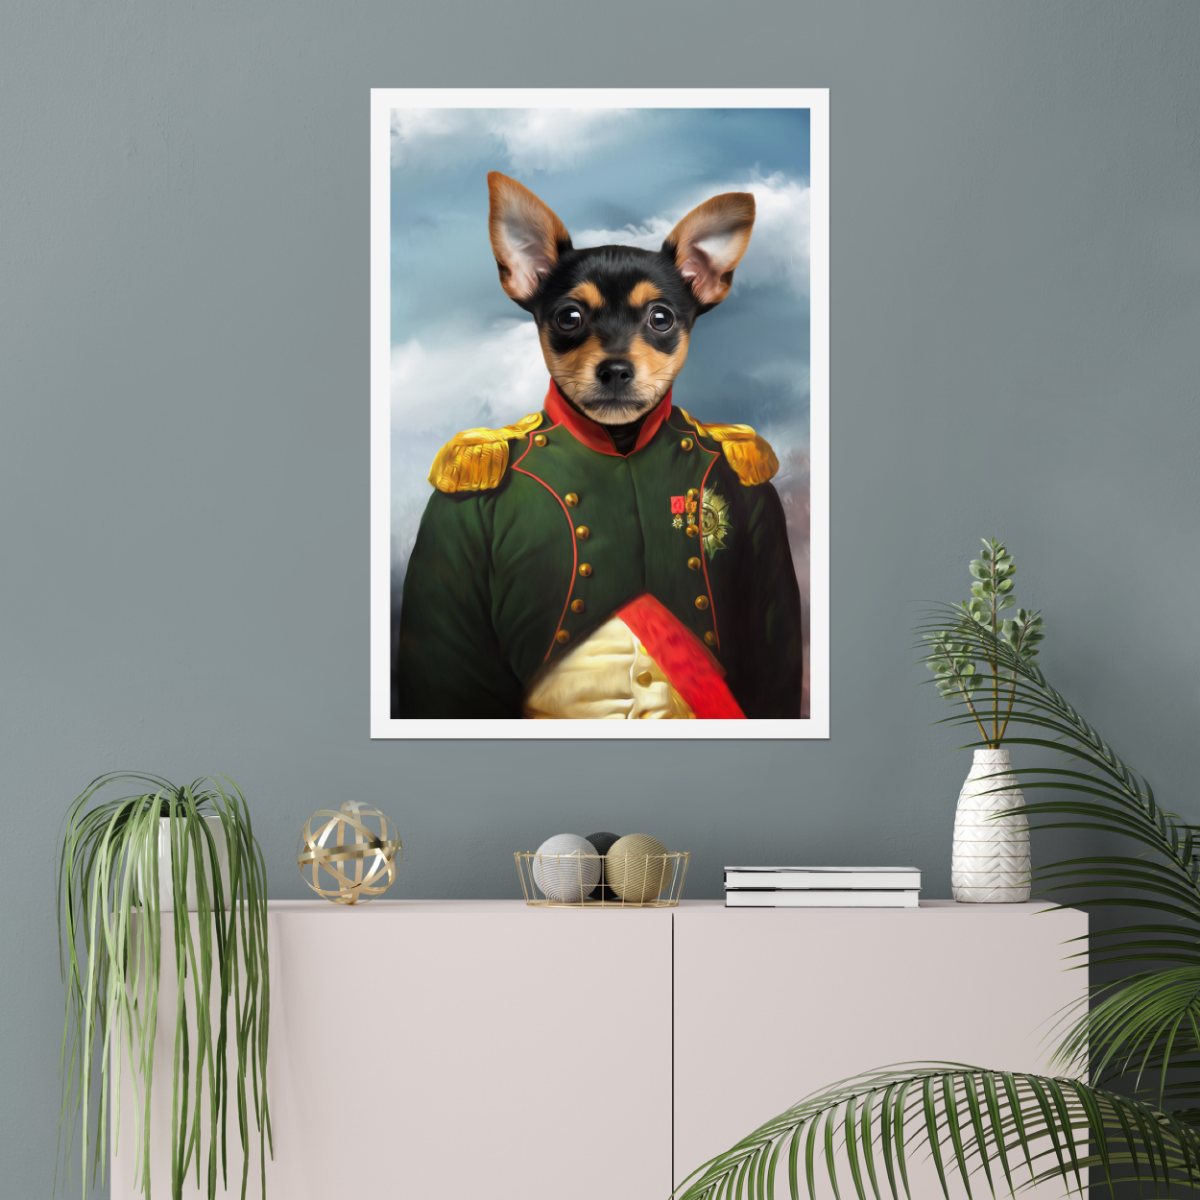 The Dignitary: Custom Pet Poster - Paw & Glory - #pet portraits# - #dog portraits# - #pet portraits uk#Paw & Glory, paw and glory, custom pet portraits canvas pet portrait with costume pet portrait illustration, pet portraits general noble pawtrait, peaky blinders pet portrait pet portraits